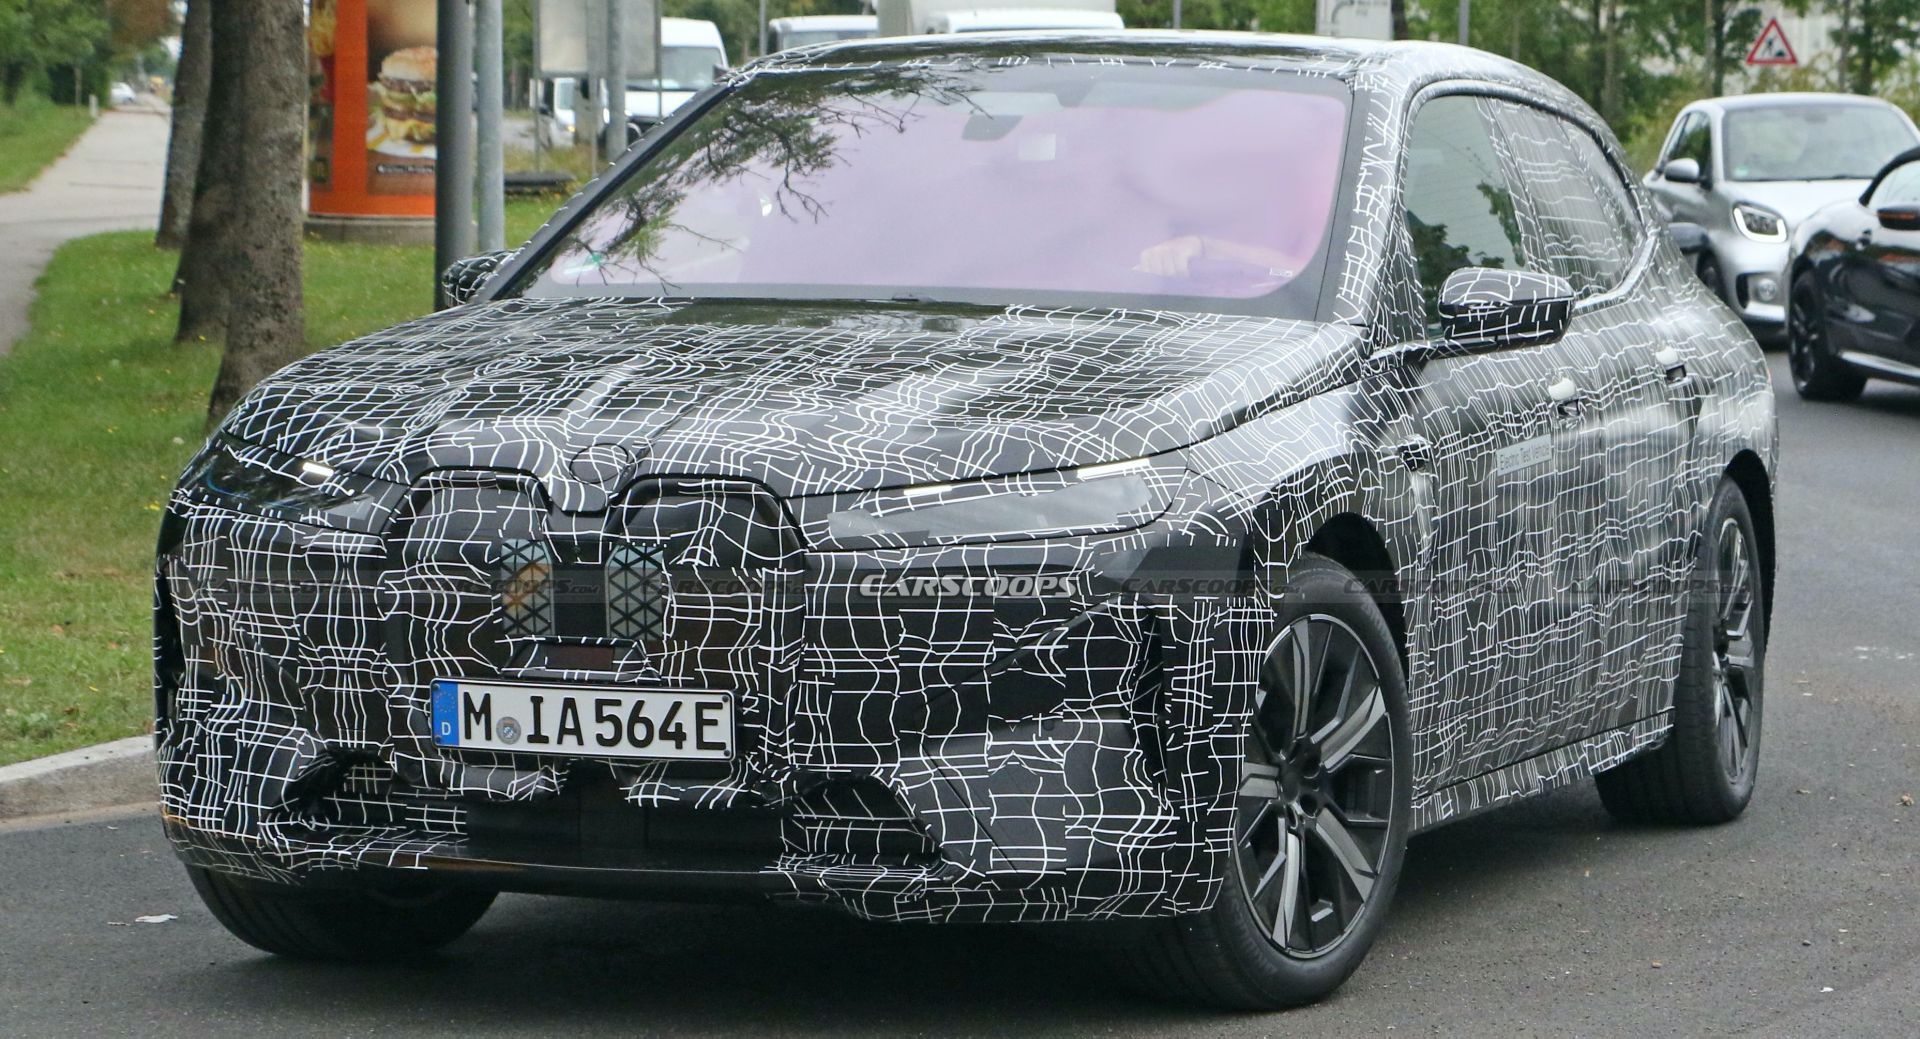 Get An Up-Close Look At The 2022 BMW iX / iNext Electric SUV